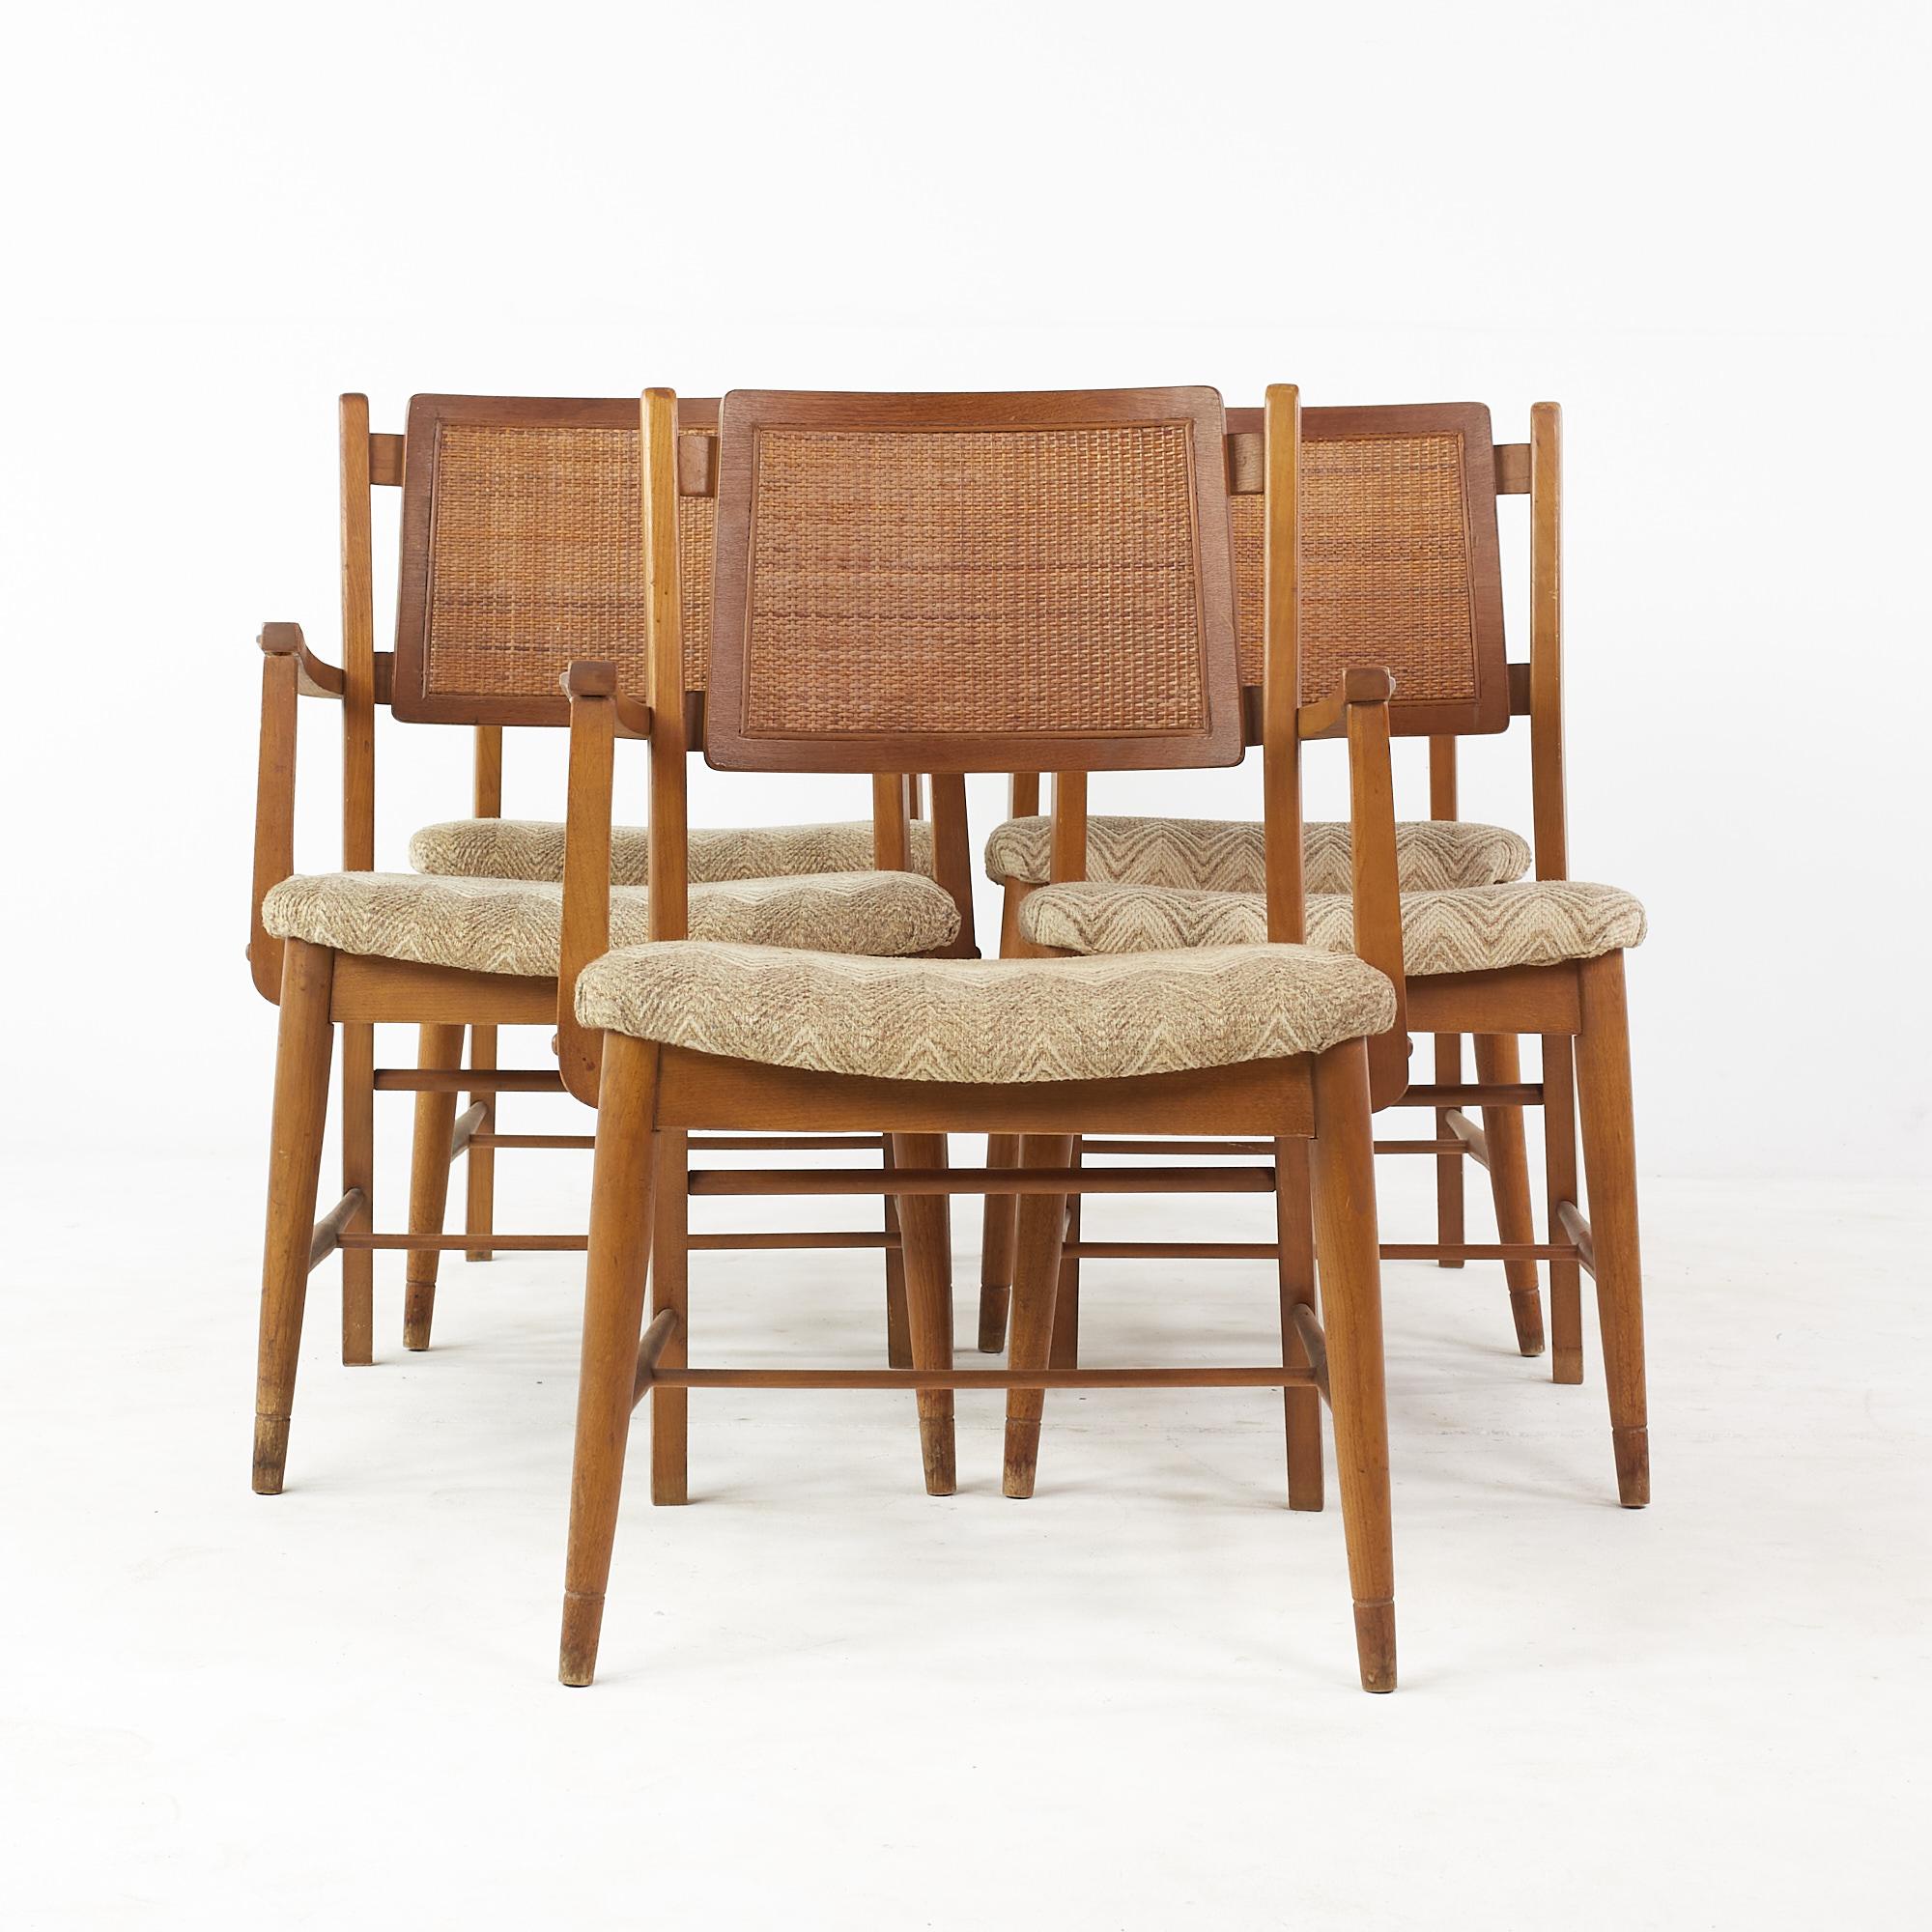 Mainline by Hooker Mid Century Walnut and Cane Dining Chairs – Set of 5

Each armless chair measures: 19.5 wide x 21 deep x 33 high, with a seat height of 17.5 inches
Each captains chair measures: 22.5 wide x 21 deep x 33 high, with a seat height of